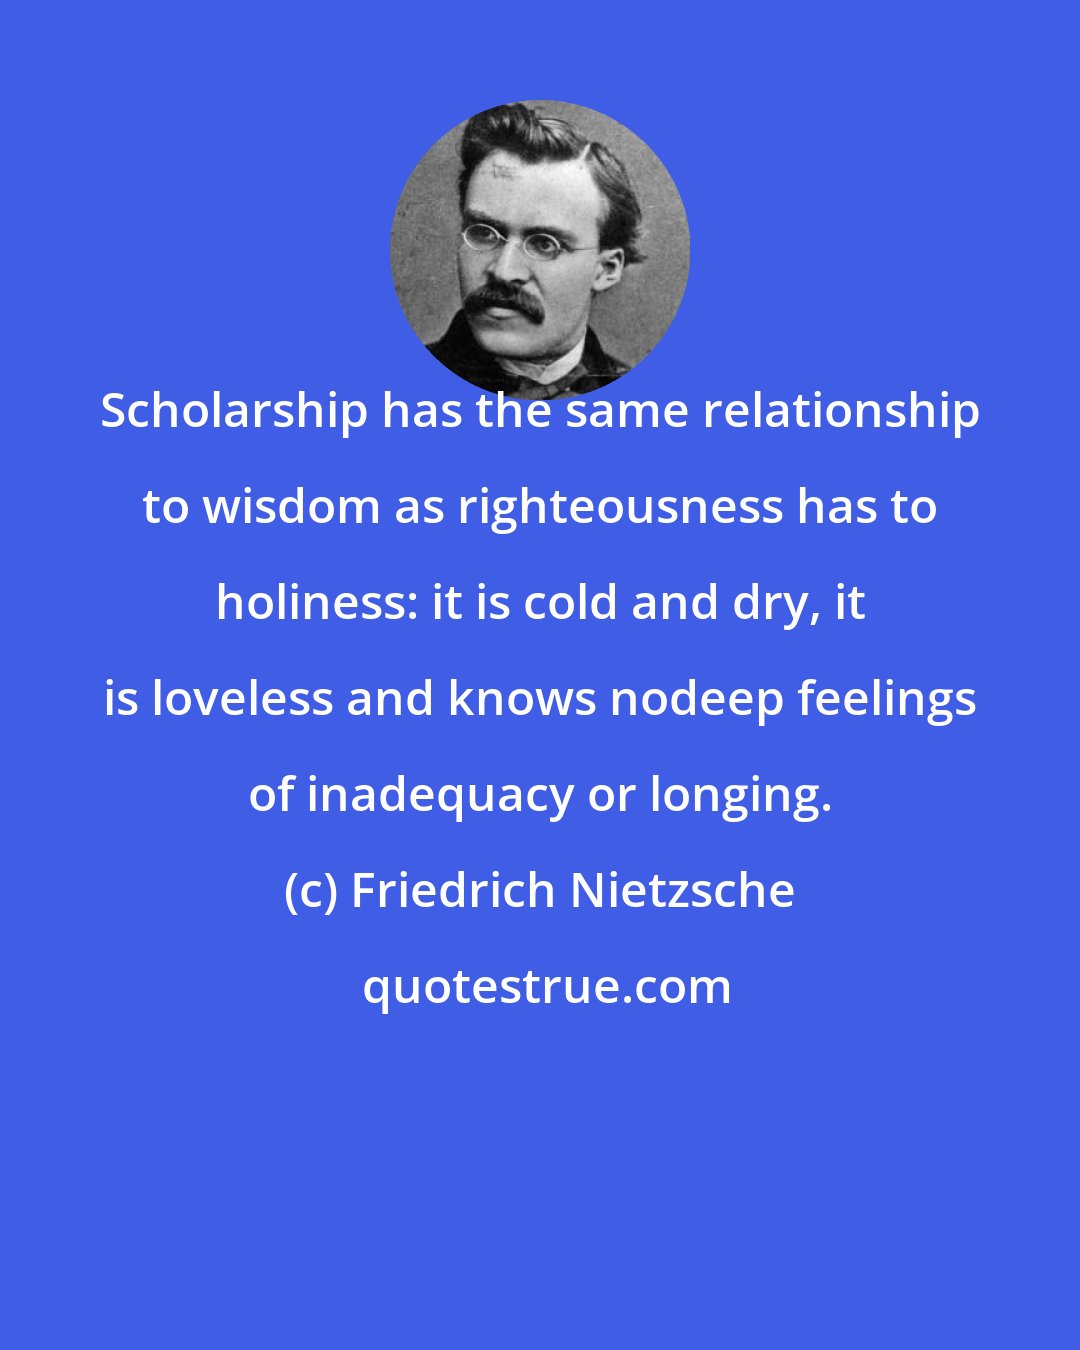 Friedrich Nietzsche: Scholarship has the same relationship to wisdom as righteousness has to holiness: it is cold and dry, it is loveless and knows nodeep feelings of inadequacy or longing.